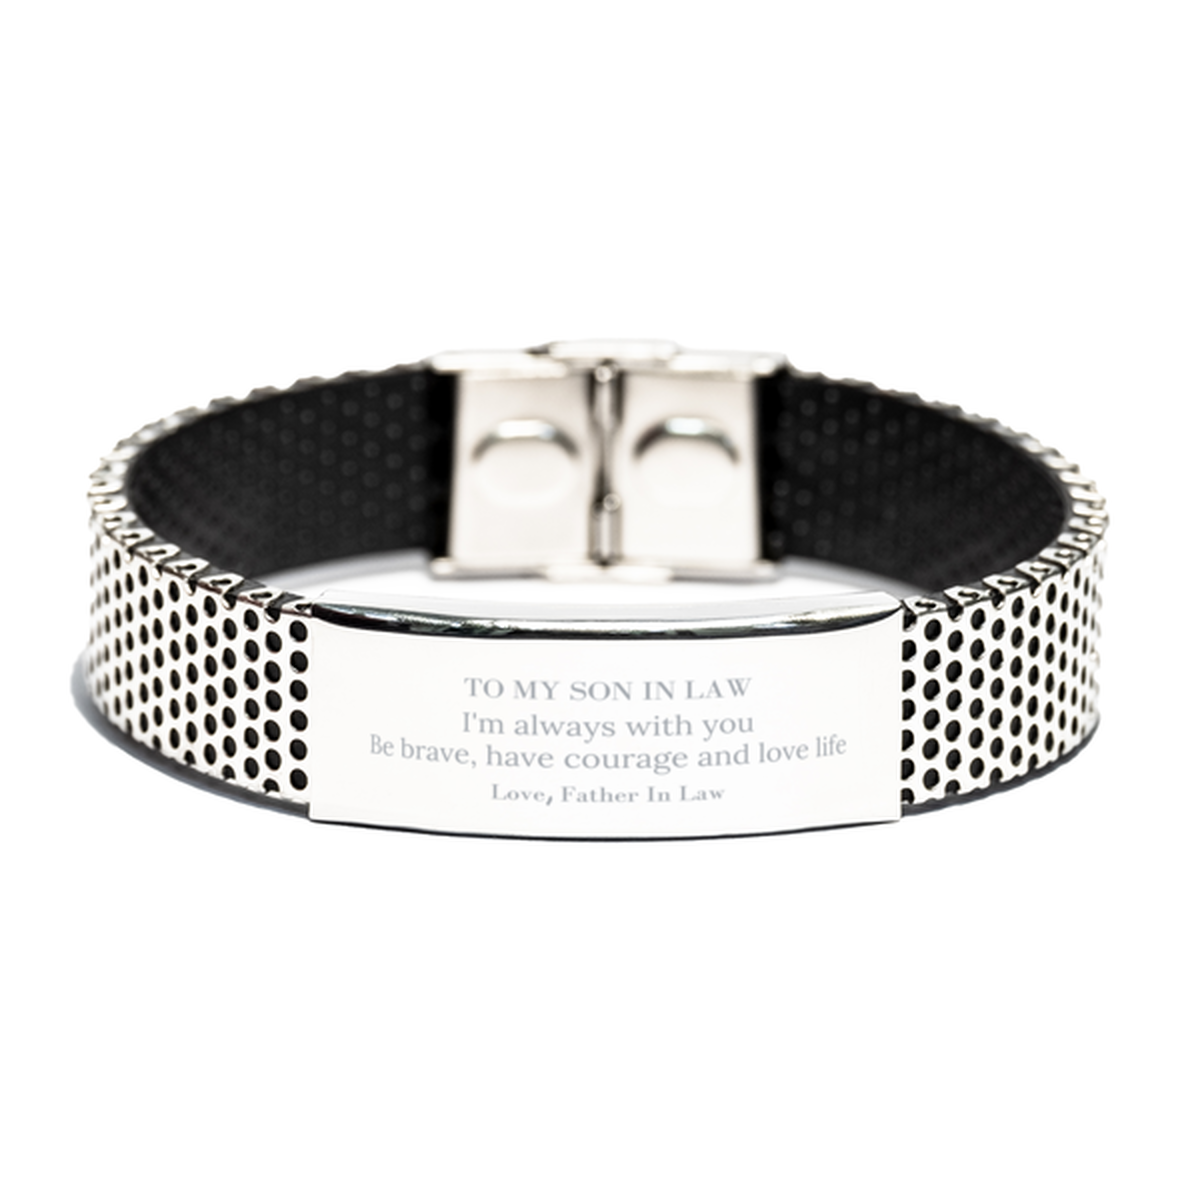 To My Son In Law Gifts from Father In Law, Unique Stainless Steel Bracelet Inspirational Christmas Birthday Graduation Gifts for Son In Law I'm always with you. Be brave, have courage and love life. Love, Father In Law